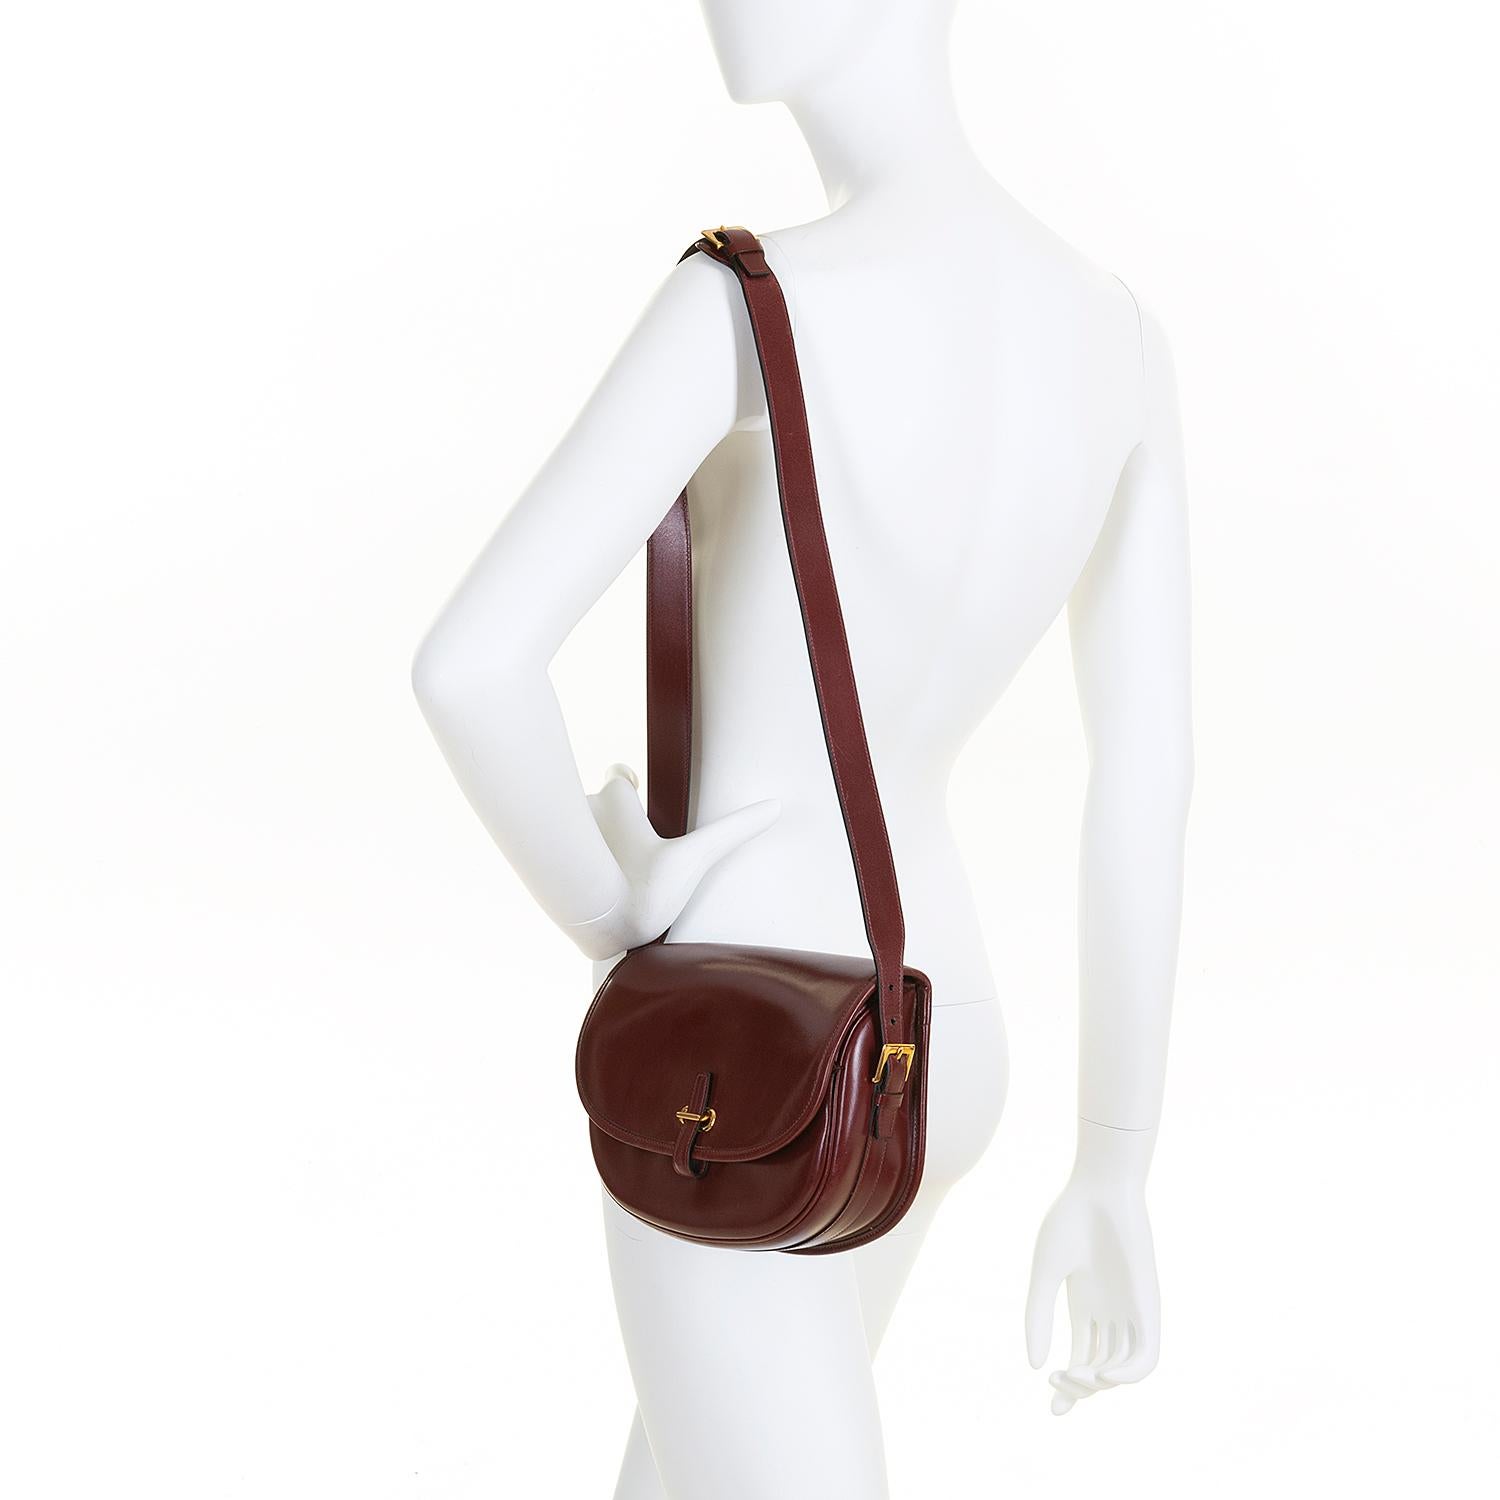 This rare vintage Hermes Bag 'Sac Balle De Golf' is finished in Burgundy Box Calfskin, accented with gold hardware. The shoulder bag is fitted with an adjustable shoulder strap and is in excellent condition throughout. From a private collection in